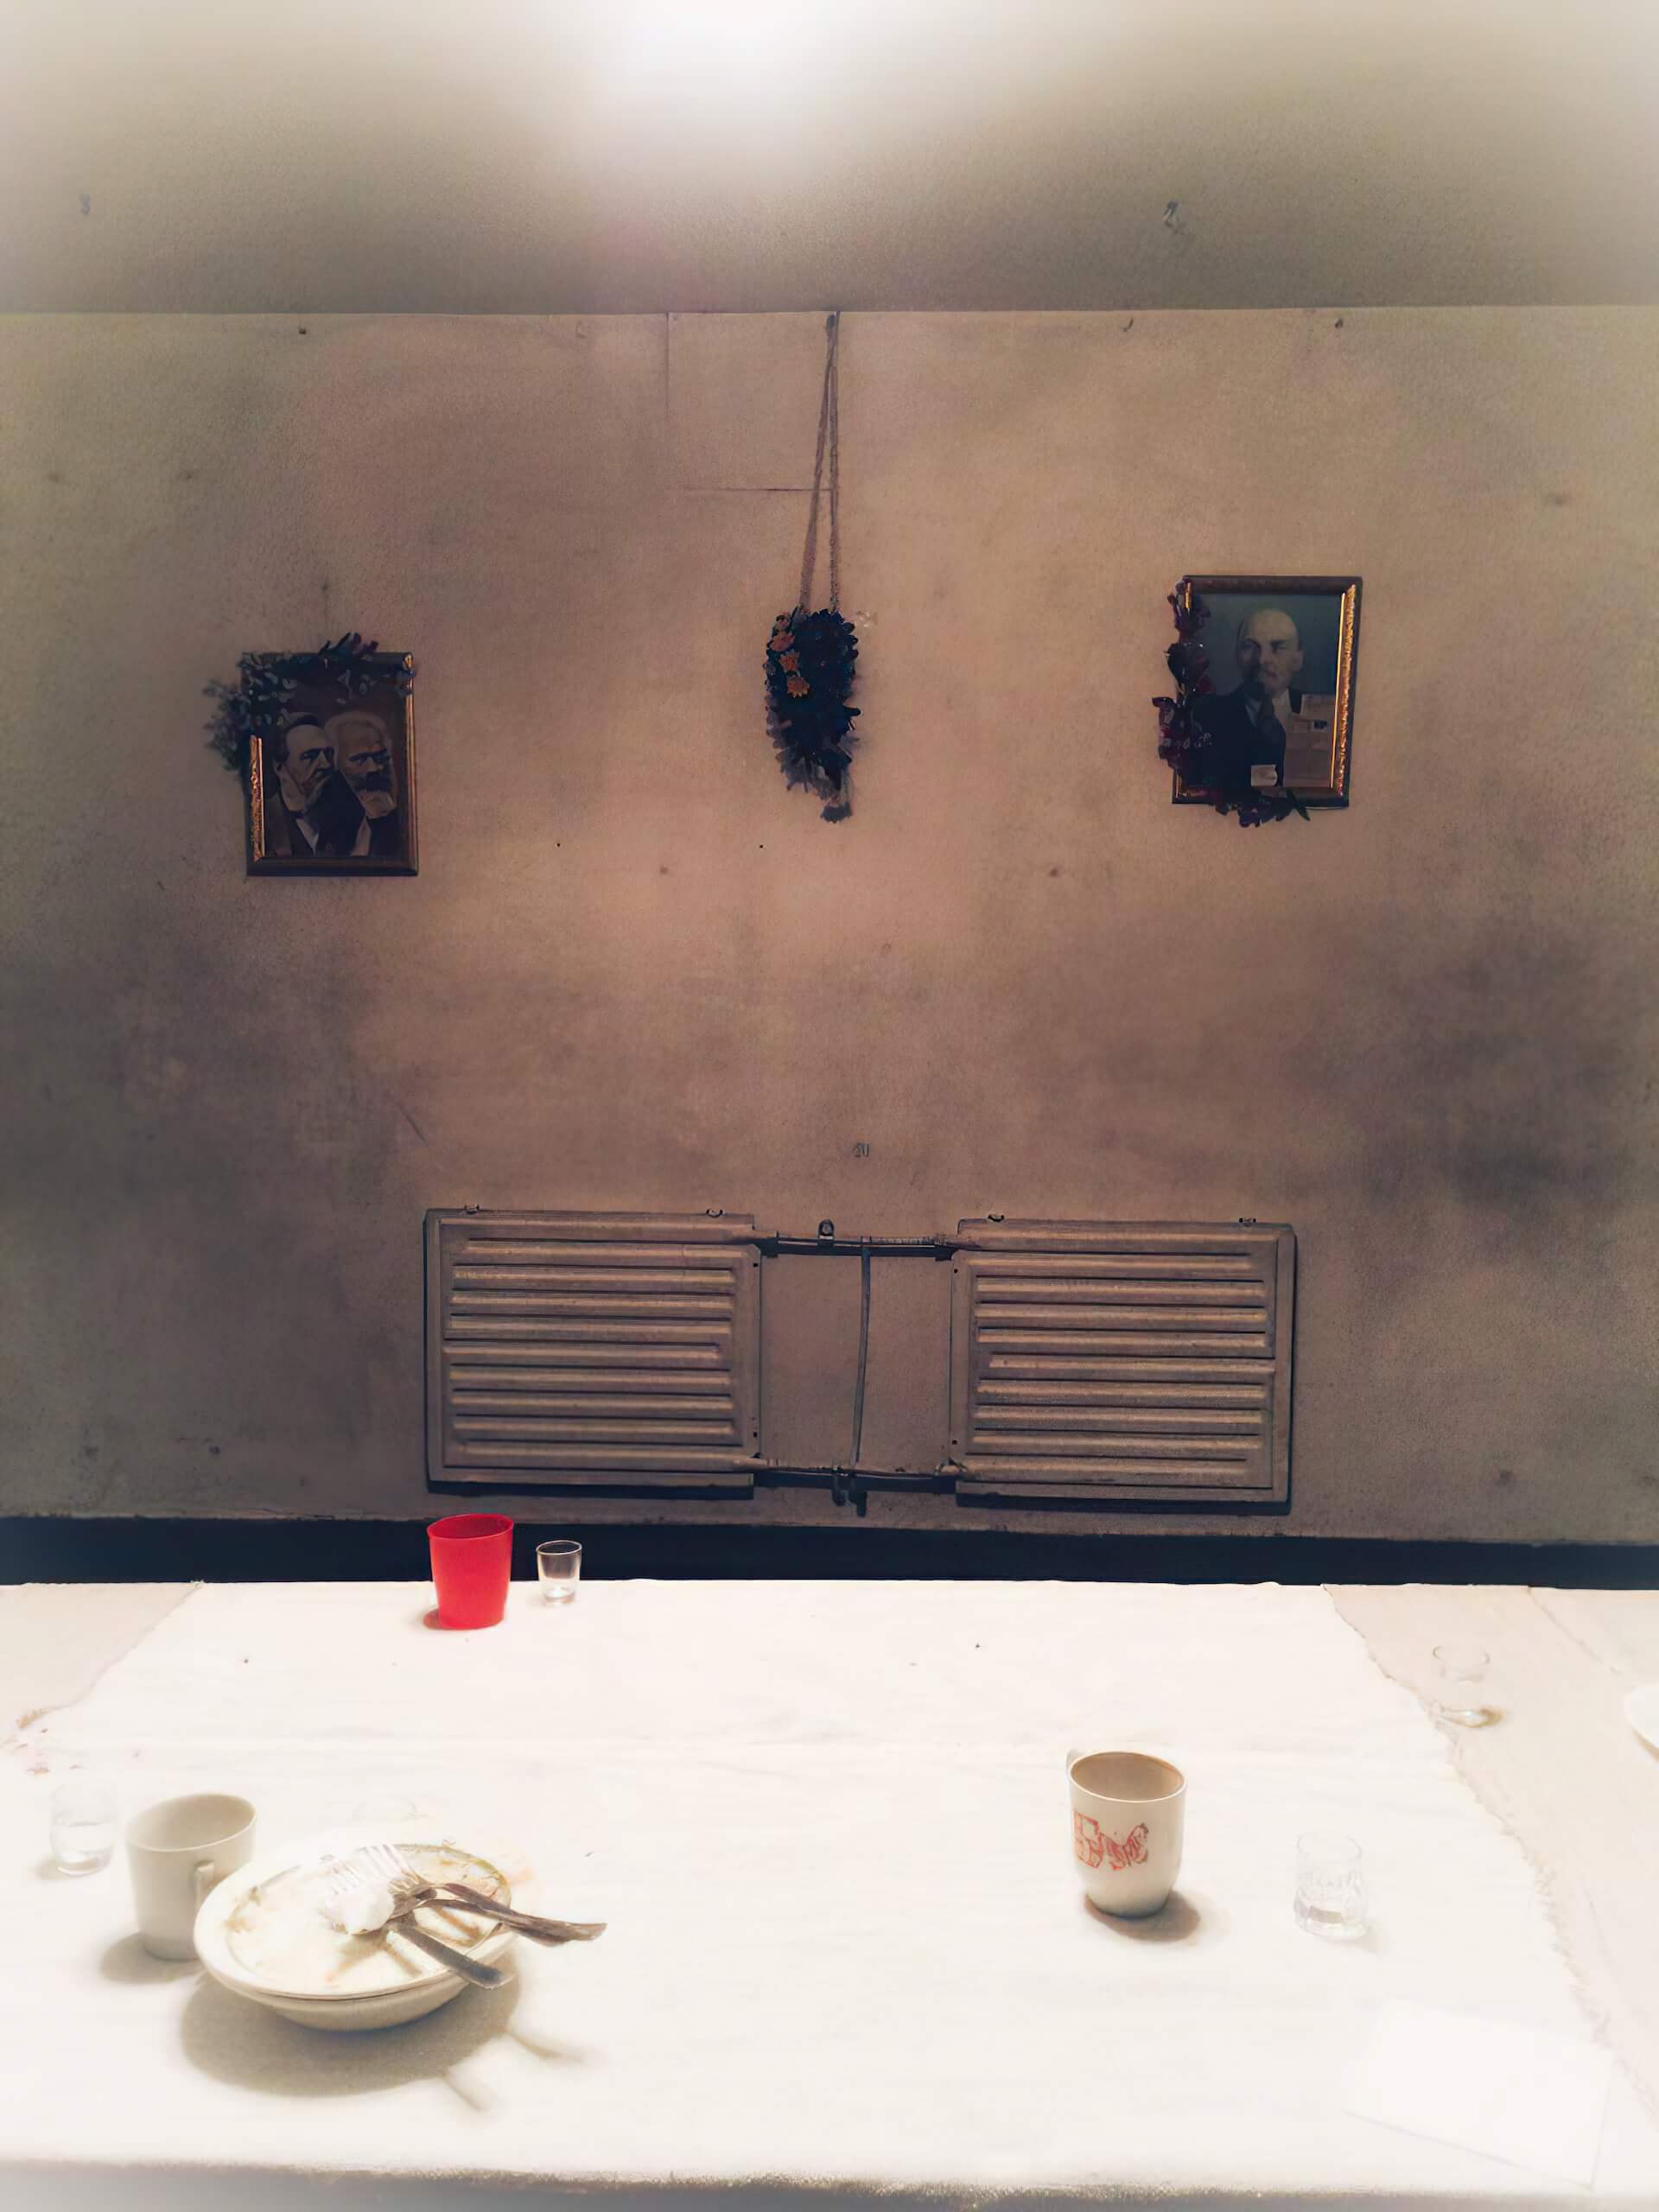 In an empty white room, there is a white table with white plates and mug cups. There is a red cup as well along with some shotglasses. Two framed pictures of someone is hanging on the wall, with the frames decorated with flower.